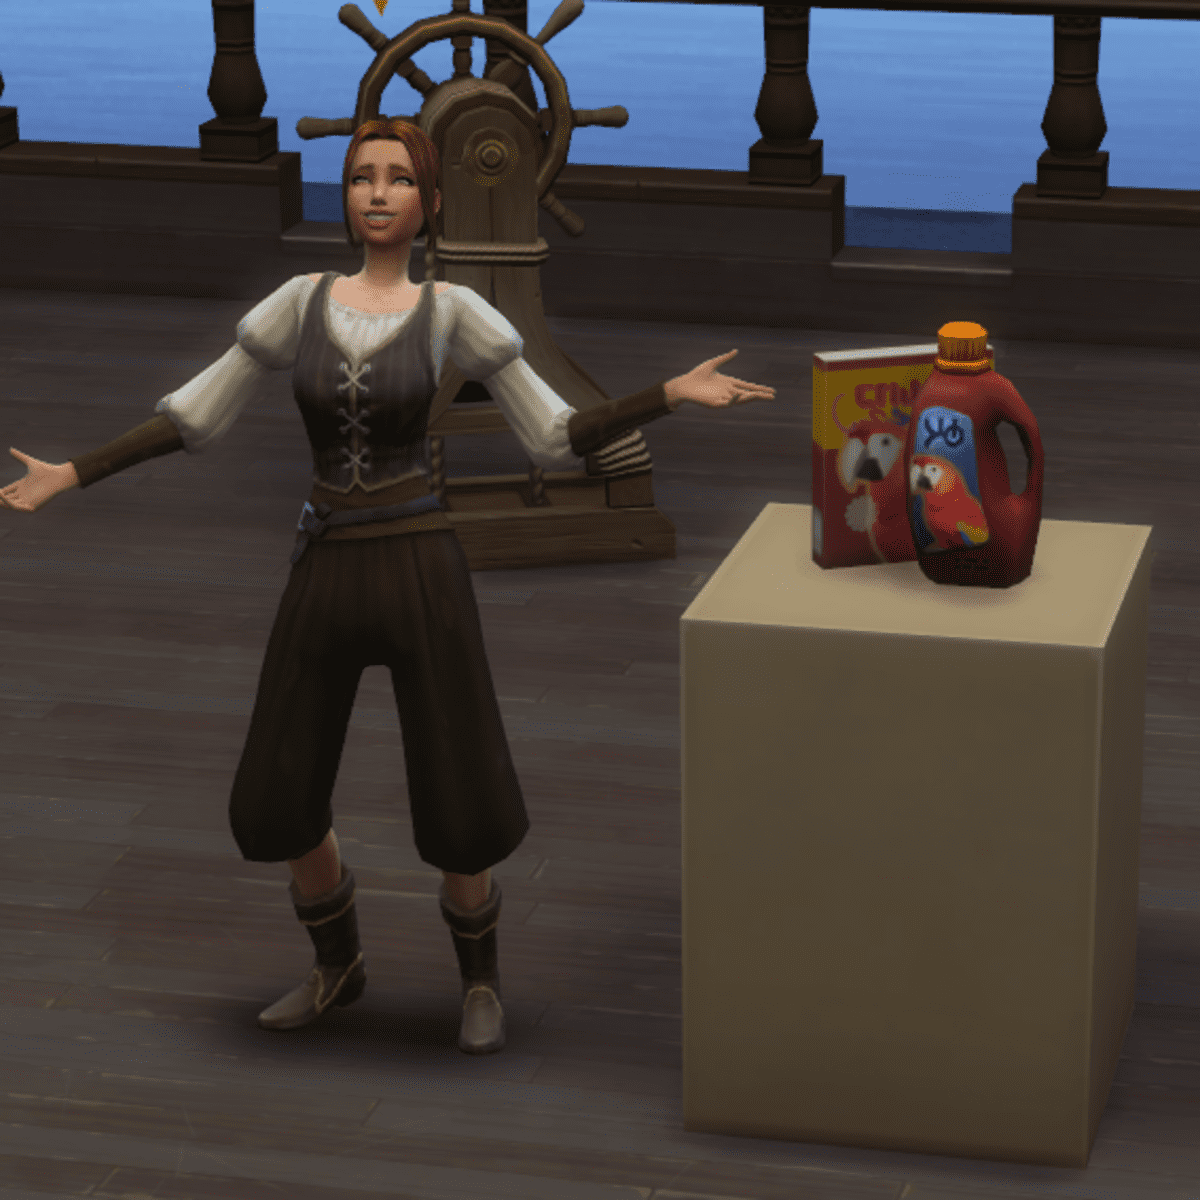 how to pose in world adventures the sims 3 pose player